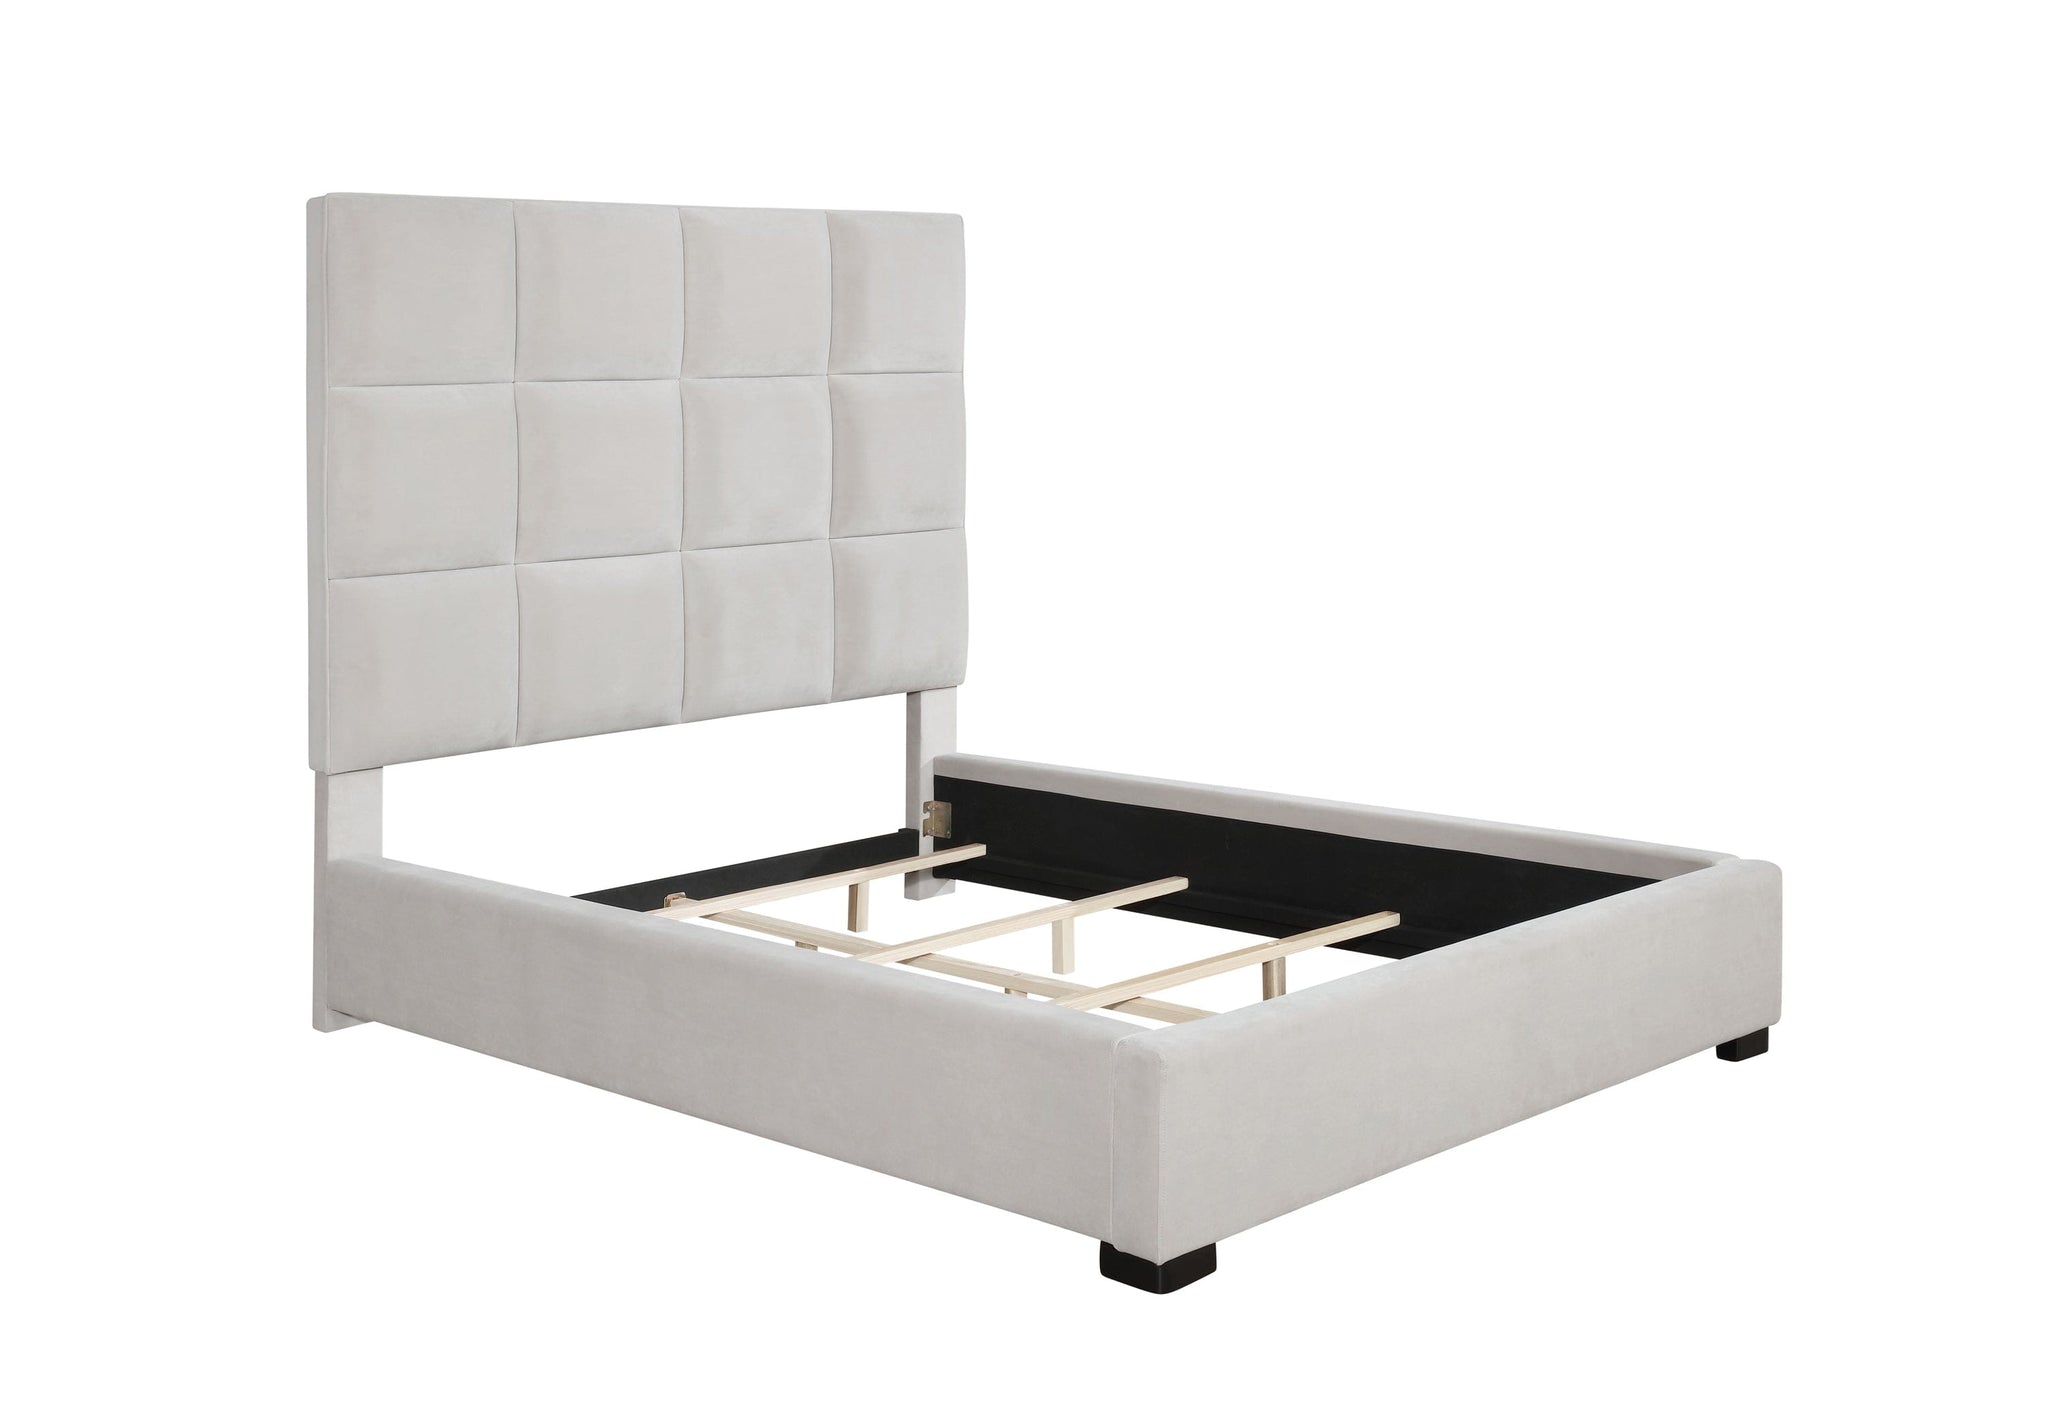 Panes Queen Tufted Upholstered Panel Bed Beige - 315850Q